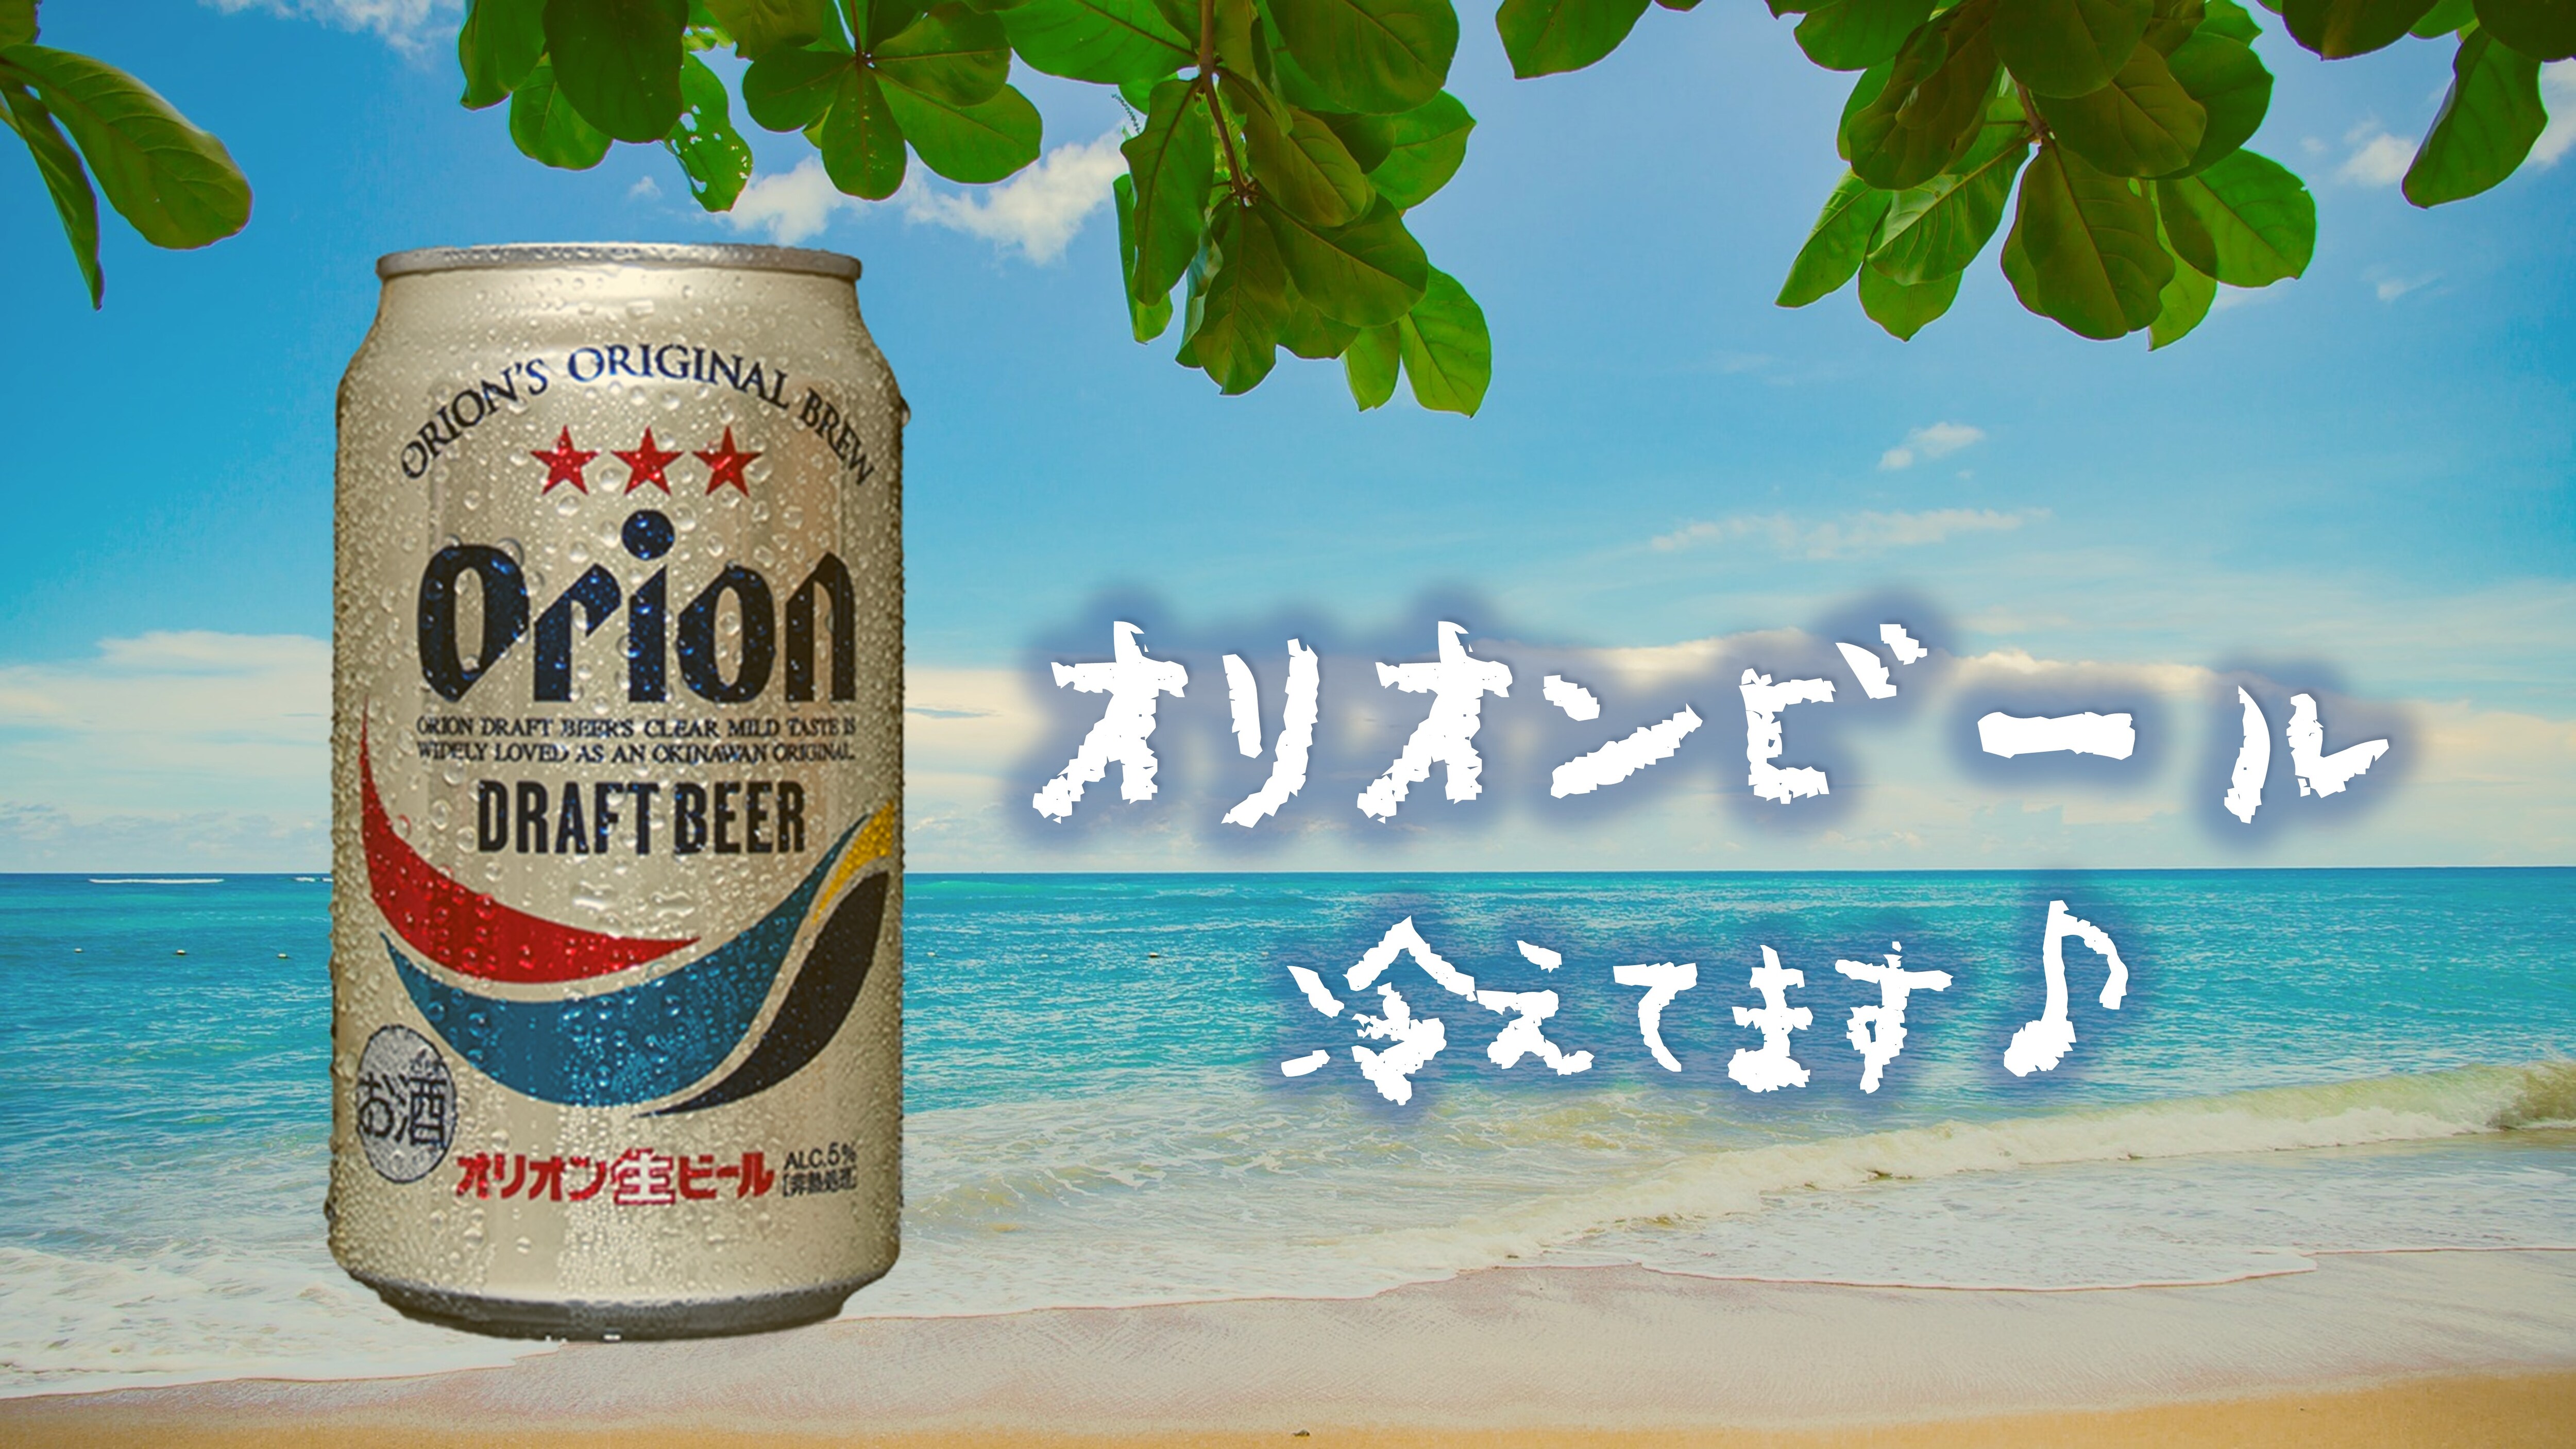 Orion beer is cold